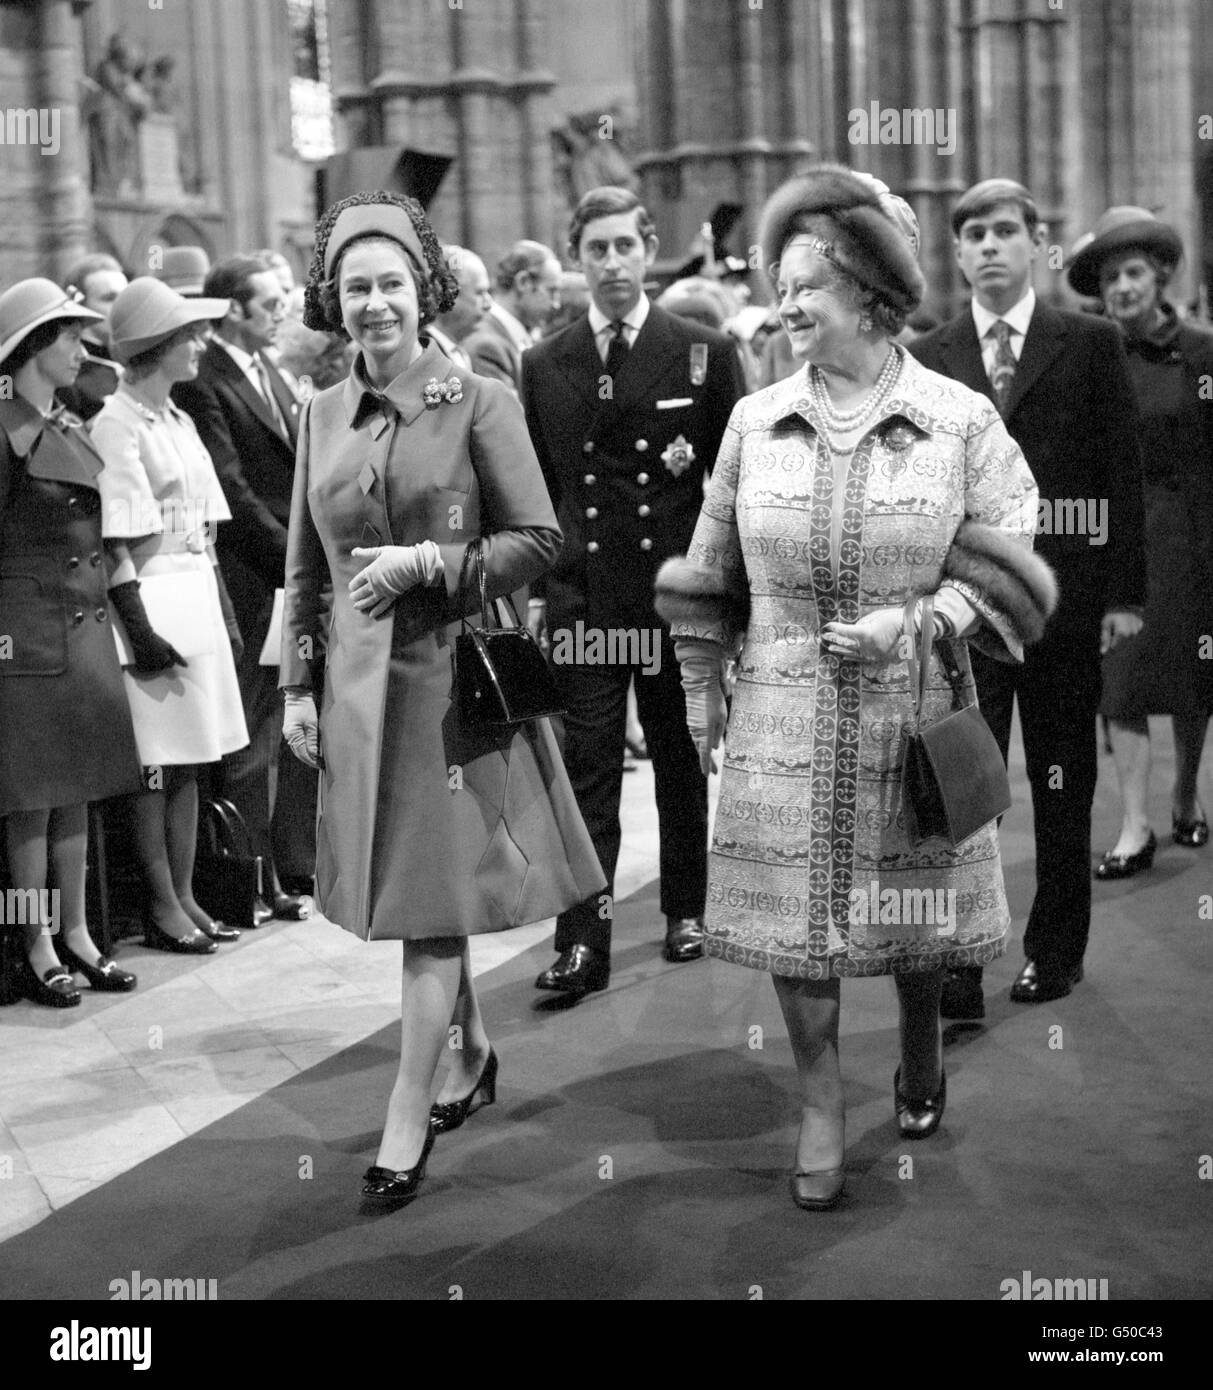 The Queen's Procession, shortly after arrival at Westminster Abbey for the Royal Wedding of Princess Anneand Captain Mark Phillips. The Queen (left) walks alongside The Queen Mother. Behind them, the uniformed Prince of Wales and his brother, Prince Andrew. Stock Photo